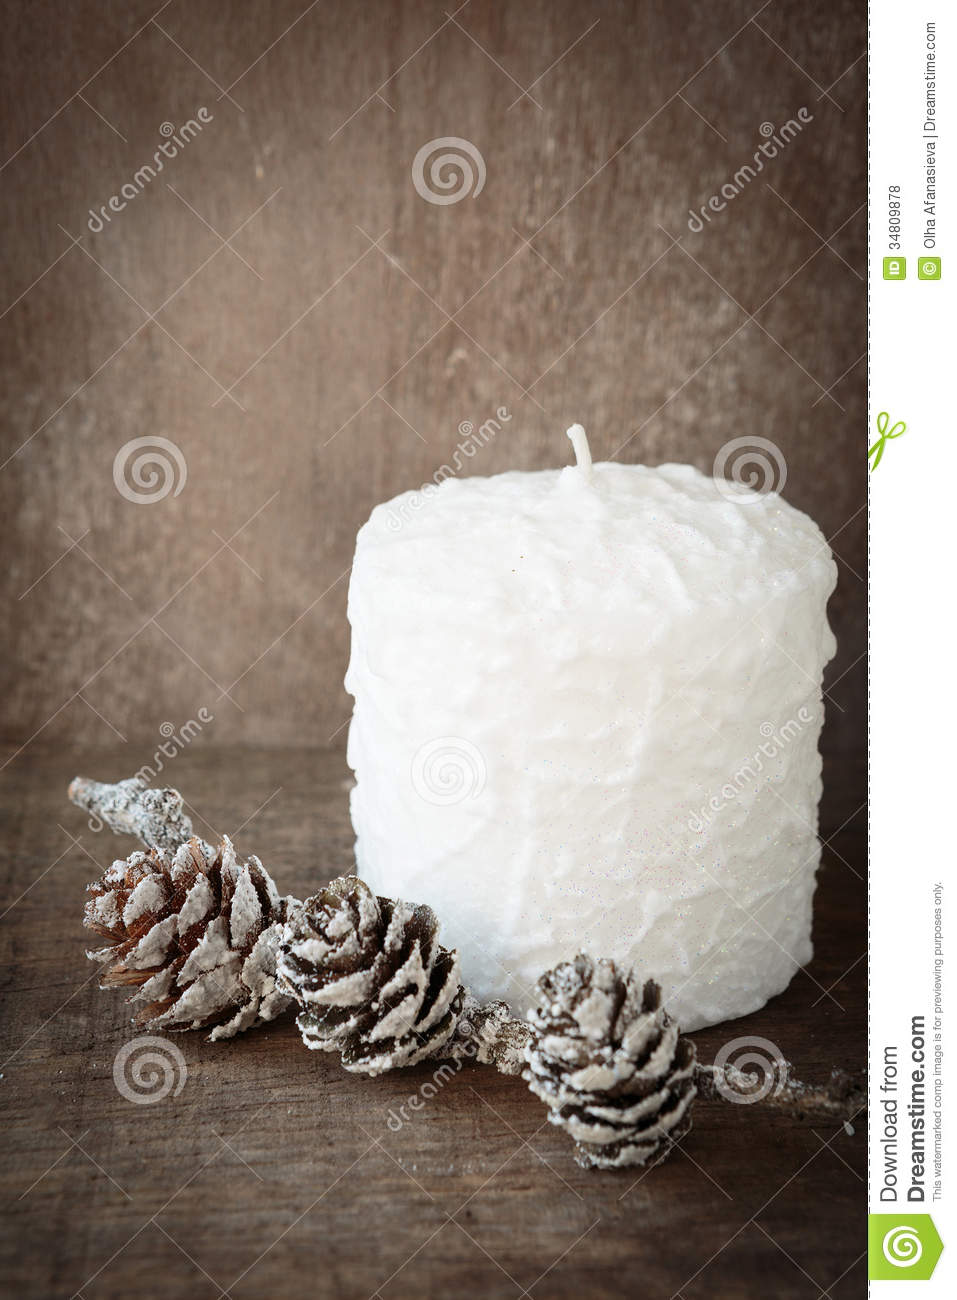 Rustic Country Background For Christmas Royalty Free Stock Photos